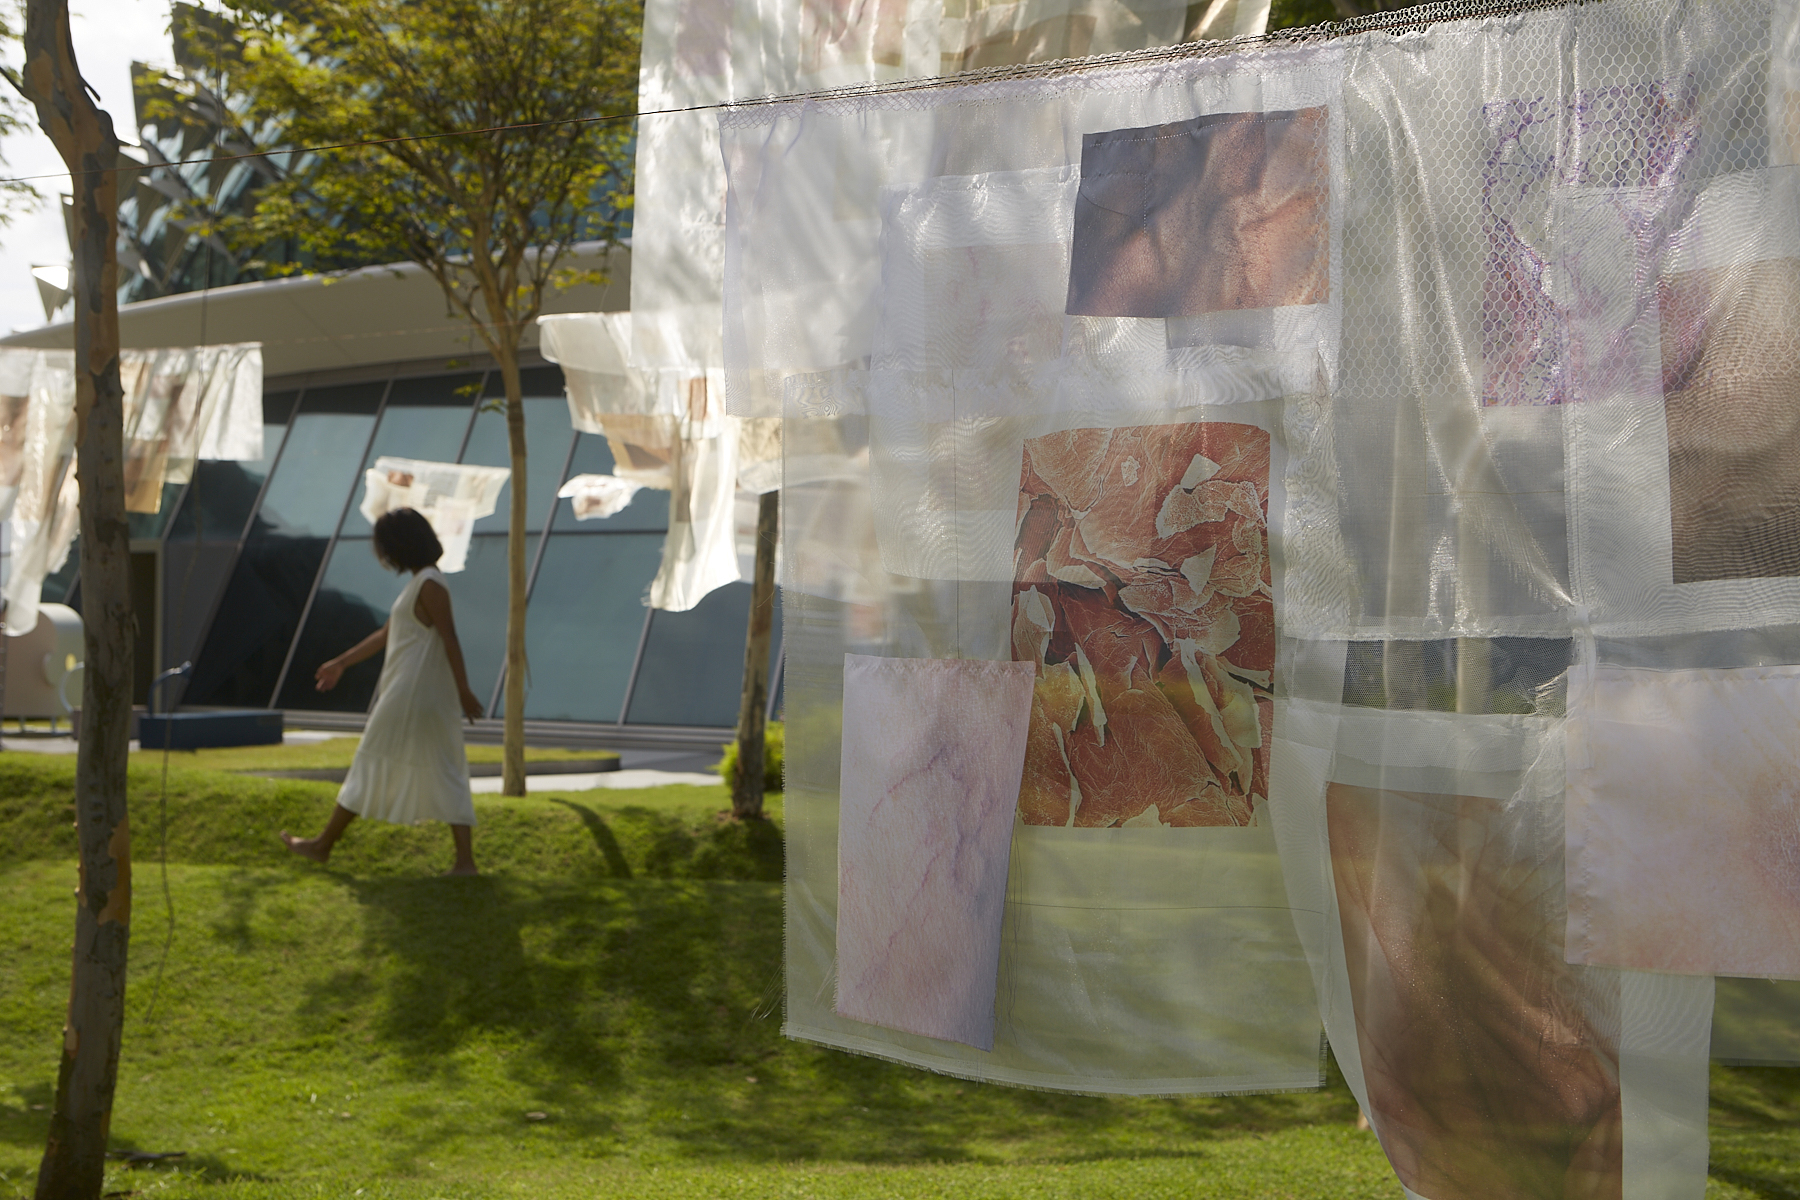 A view of an Asian woman in a white dress walking the background, with the white see-through fabric installation in the foreground hanging down revealing the neutral-coloured images